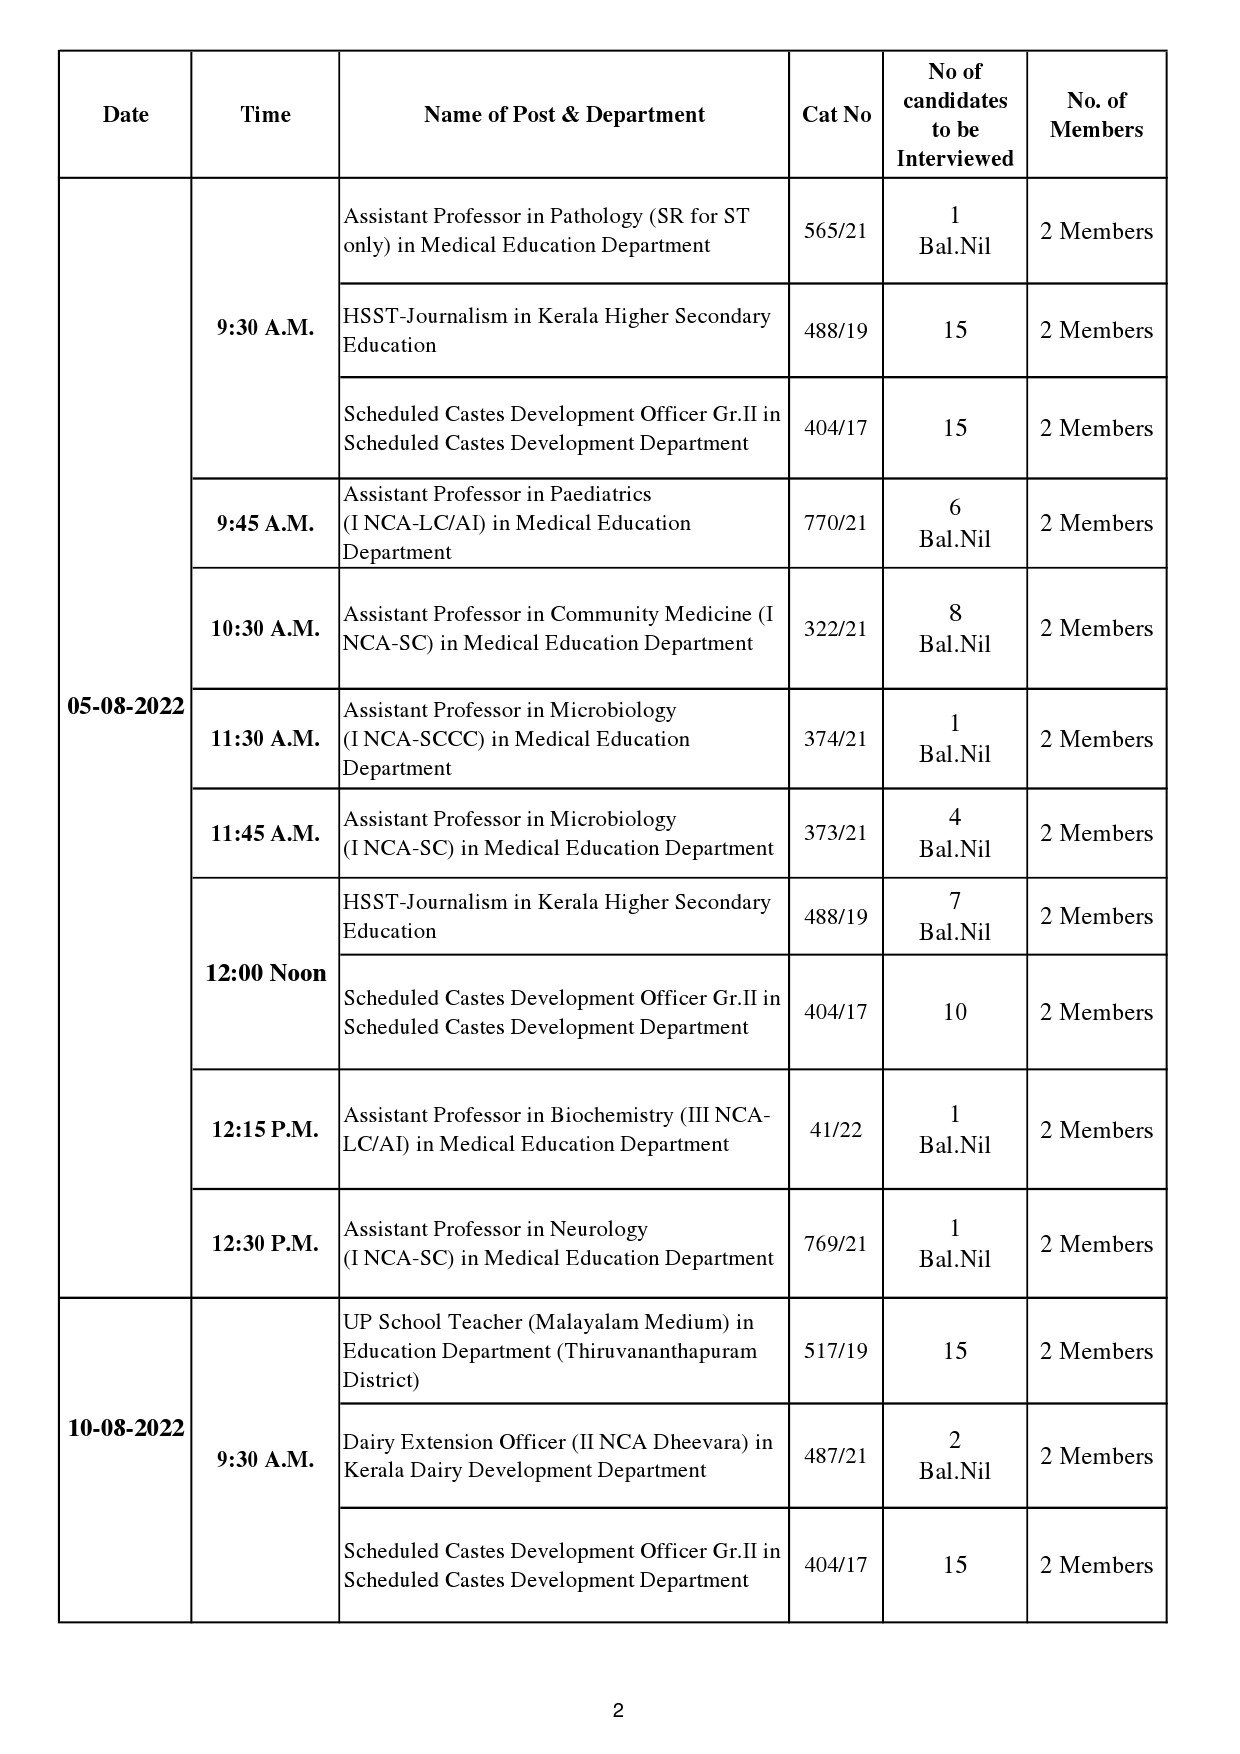 Revised Interview Programme For The Month Of August 2022 - Notification Image 2